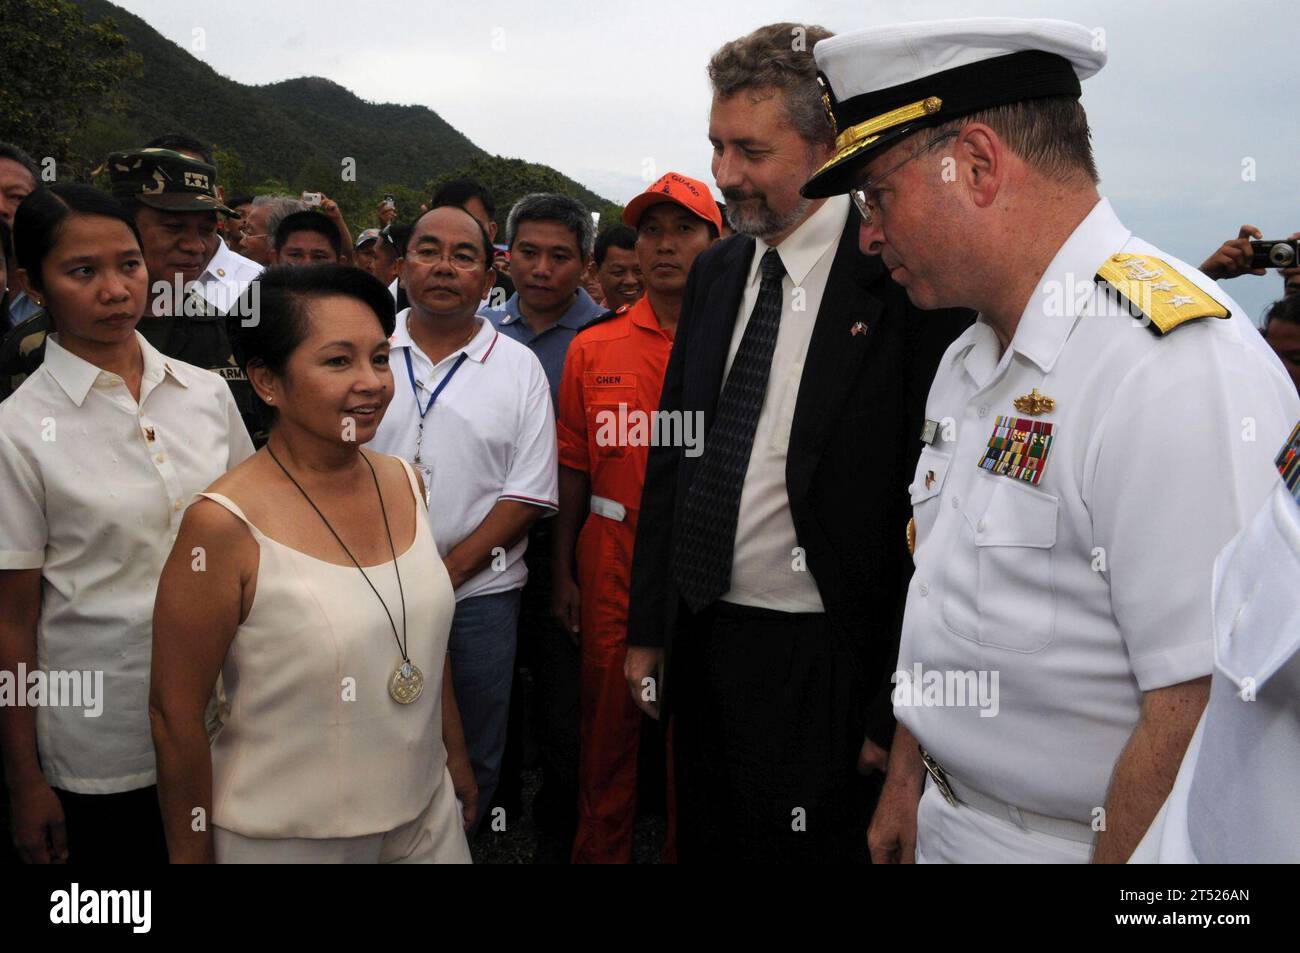 0807013659B-373 CEBU, Philippines (July 1, 2008) Rear Adm. James P. Wisecup, commander of the Ronald Reagan Carrier Strike Group, speaks with Philippines President Gloria Macapagal-Arroyo. Arroyo thanked Wisecup for the support the U.S. Navy is giving the Philippines during relief efforts in the wake of Typhoon Fengshen. The Ronald Reagan Carrier Strike Group is off the coast of Panay Island providing humanitarian assistance and disaster response to the region. U.S. Navy Stock Photo